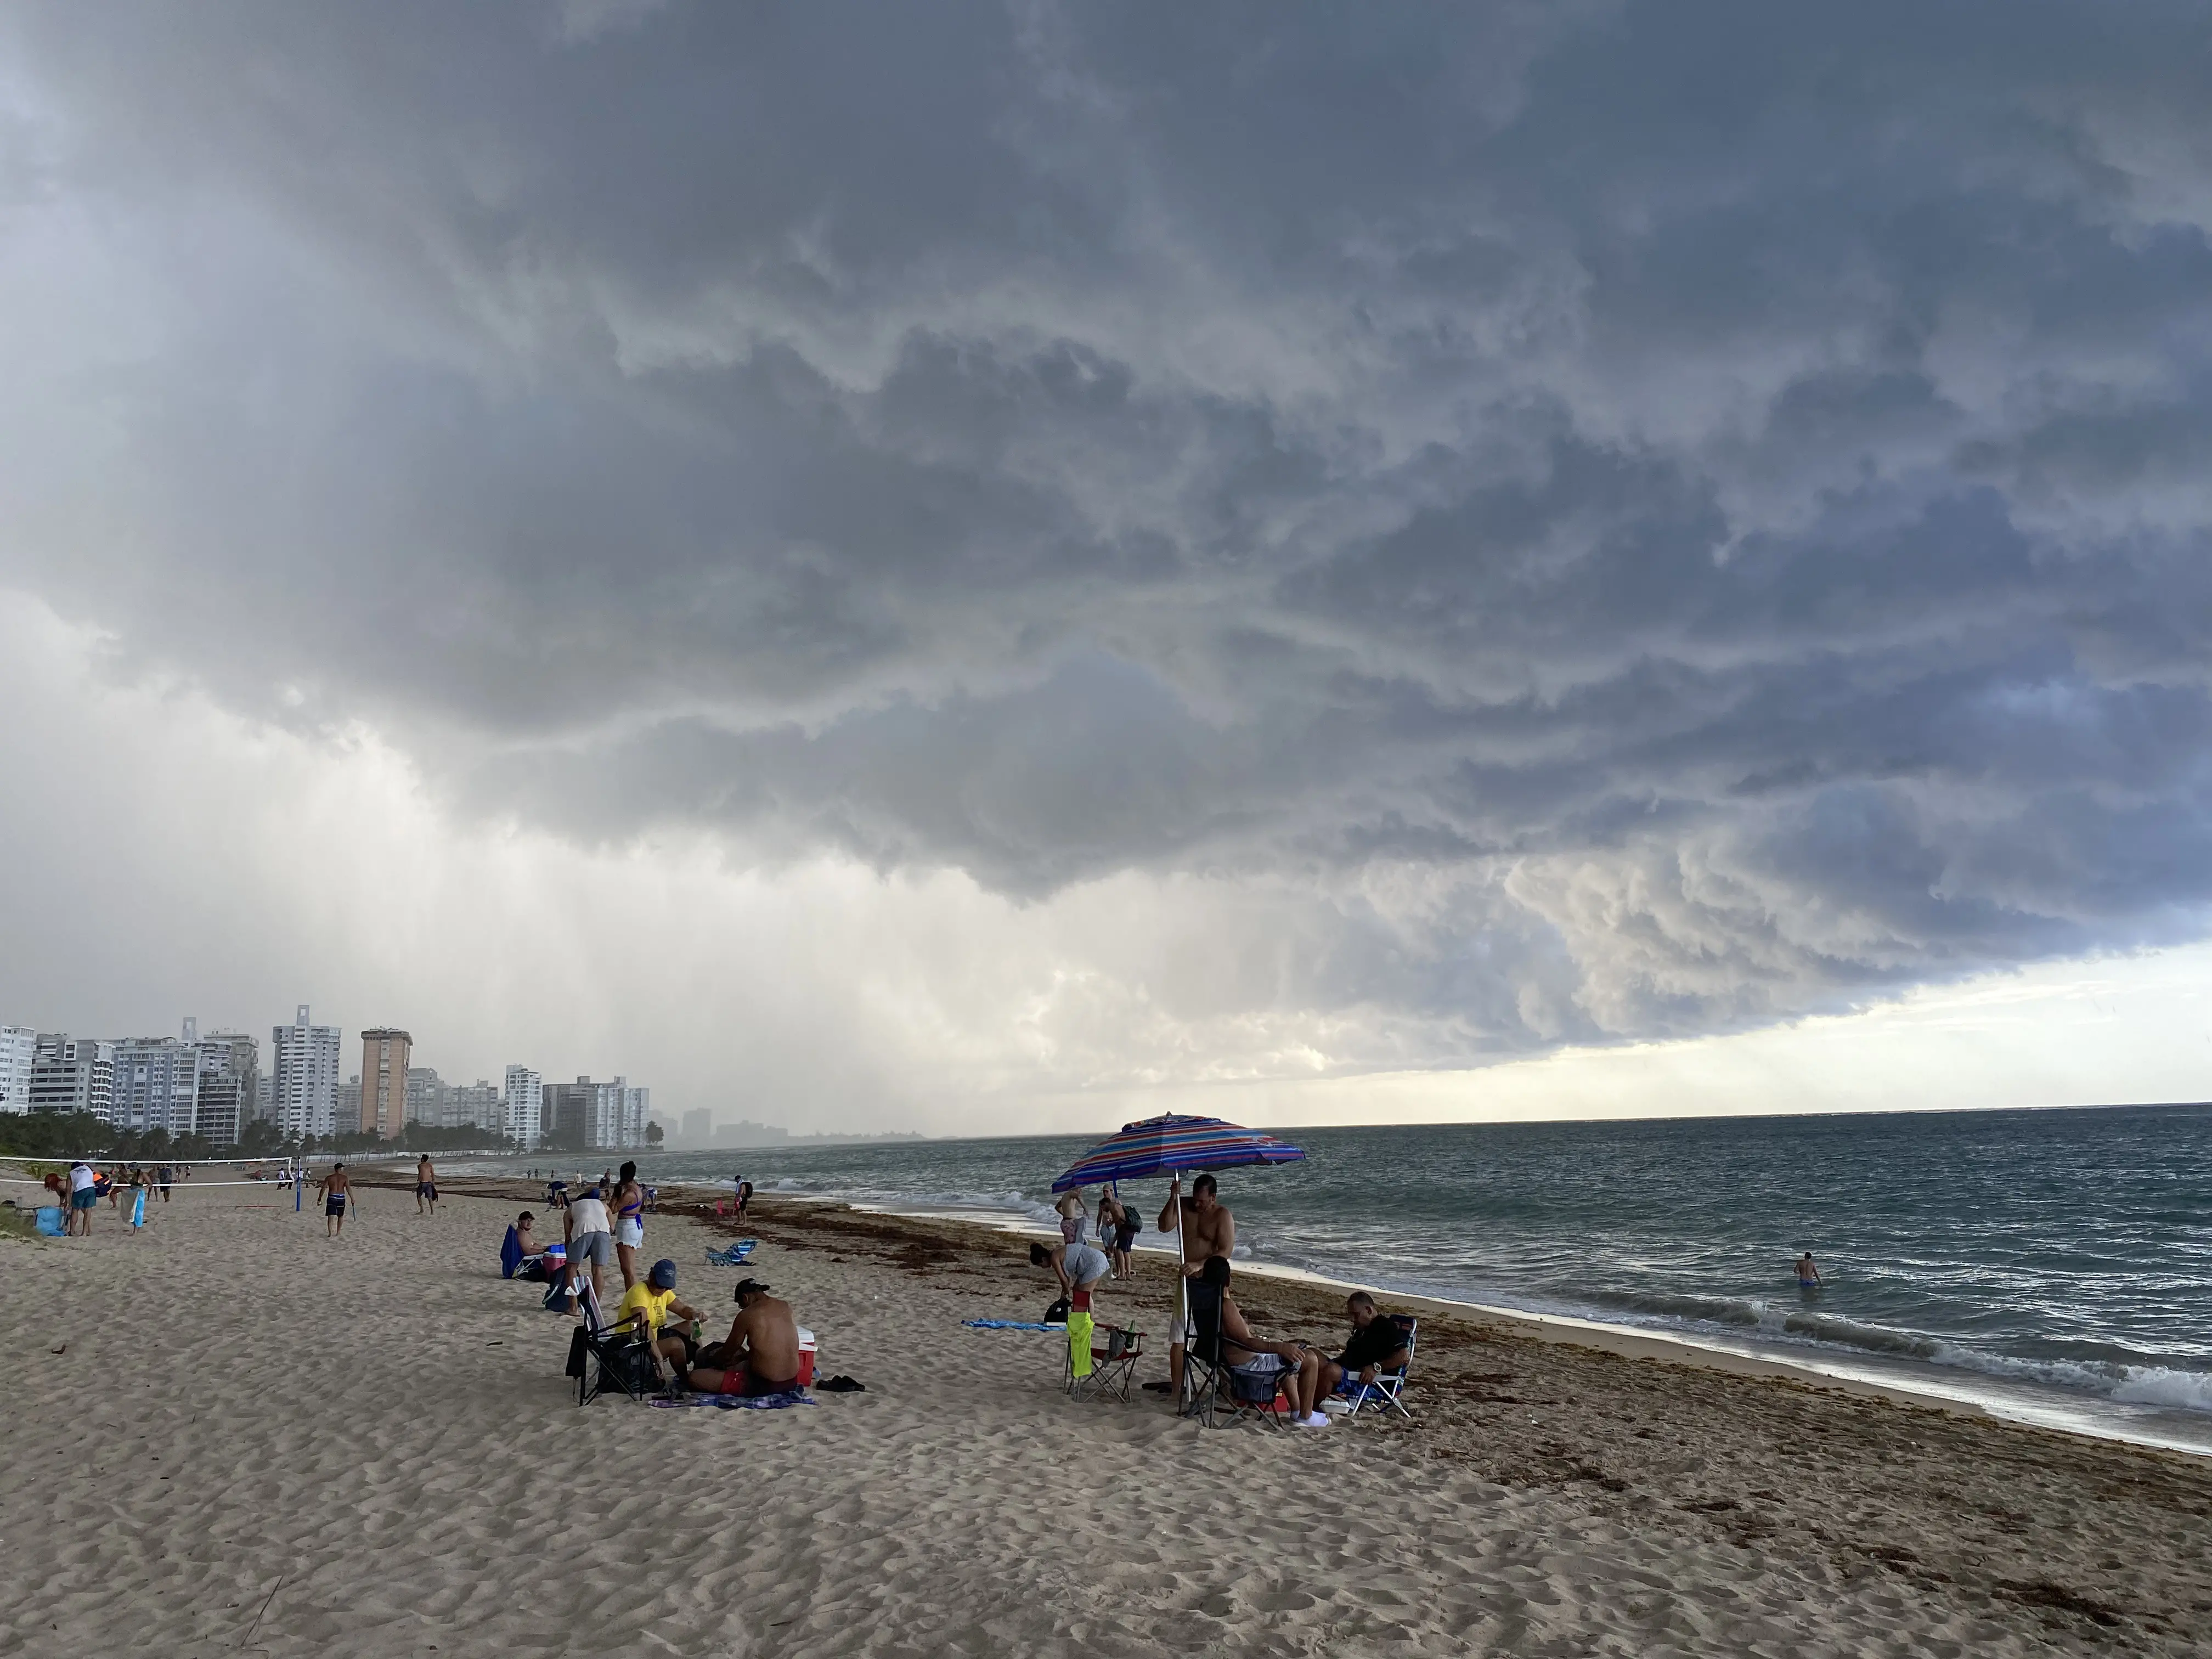 Clouds form overhead as an afternoon storm rolls in on Ocean Park beach in San Juan